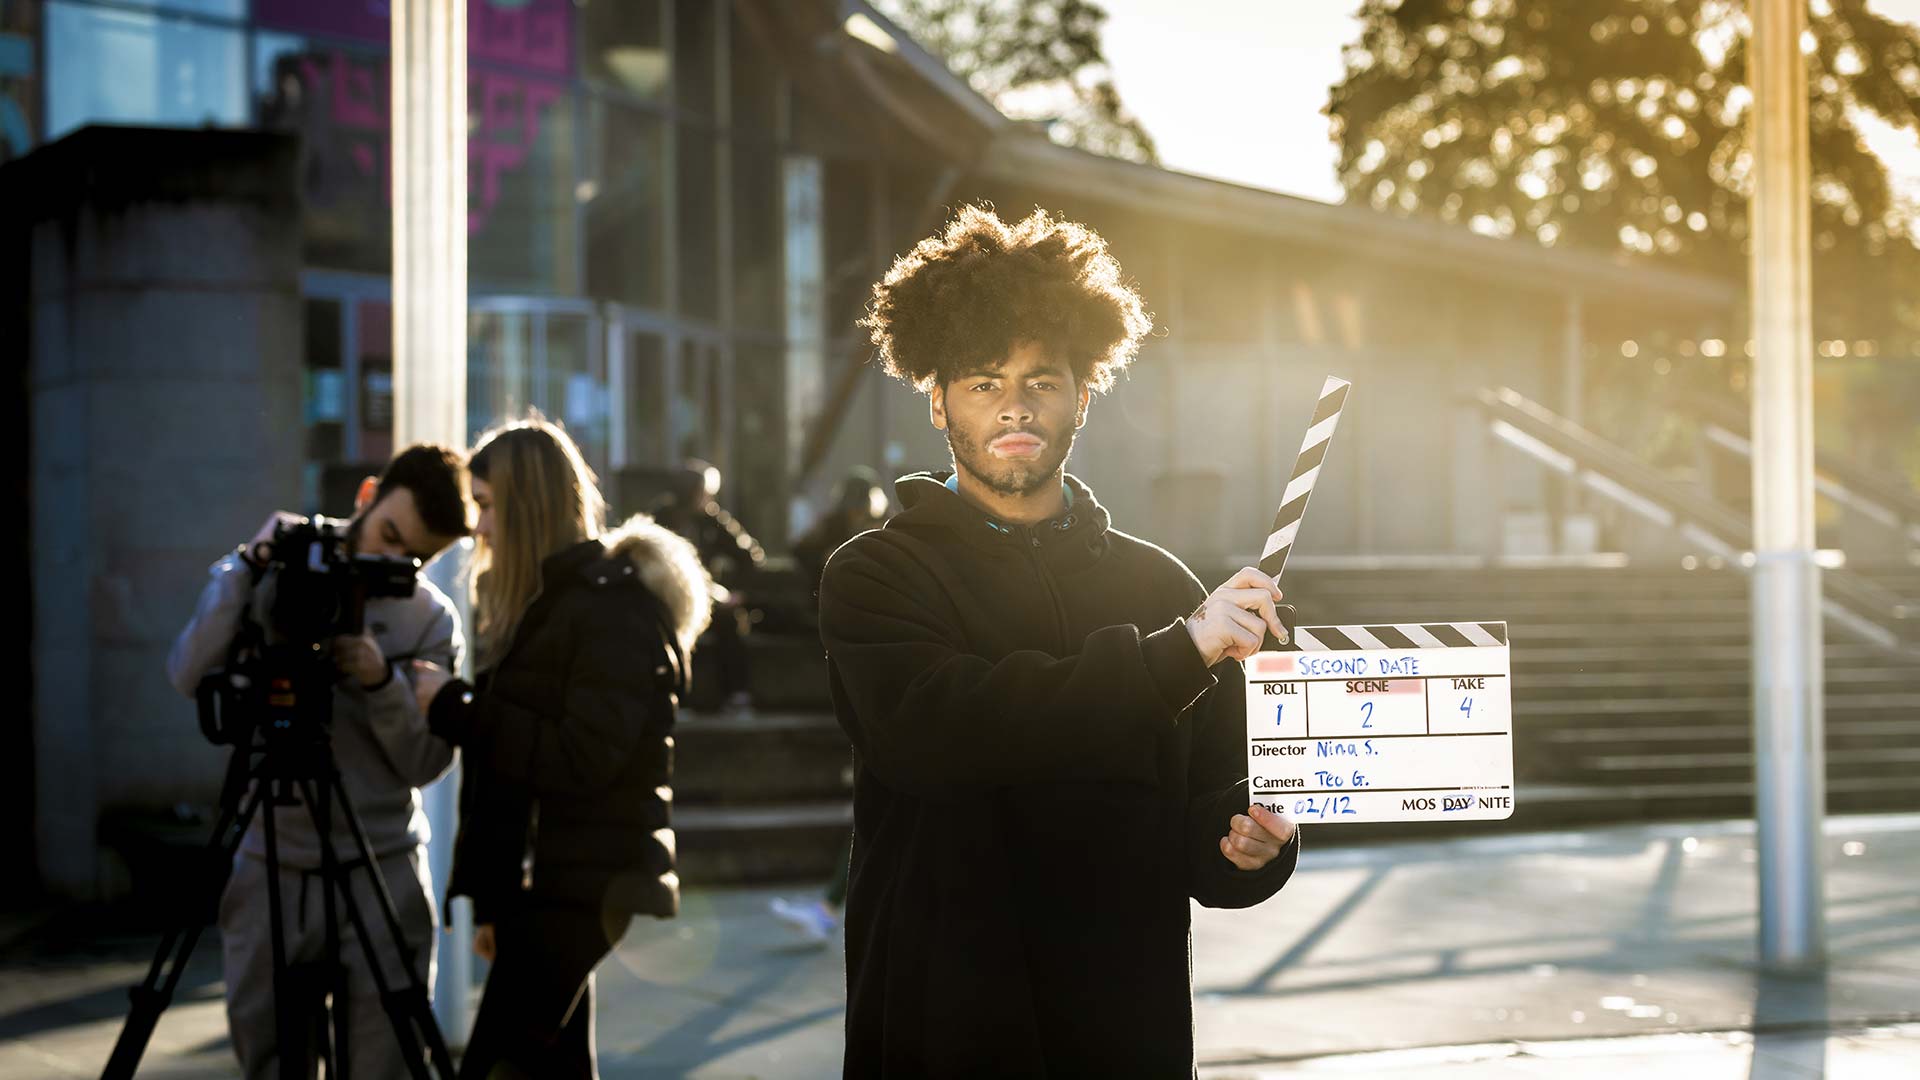 Media student working with a group on an outside shoot, and holding up a clapperboard.